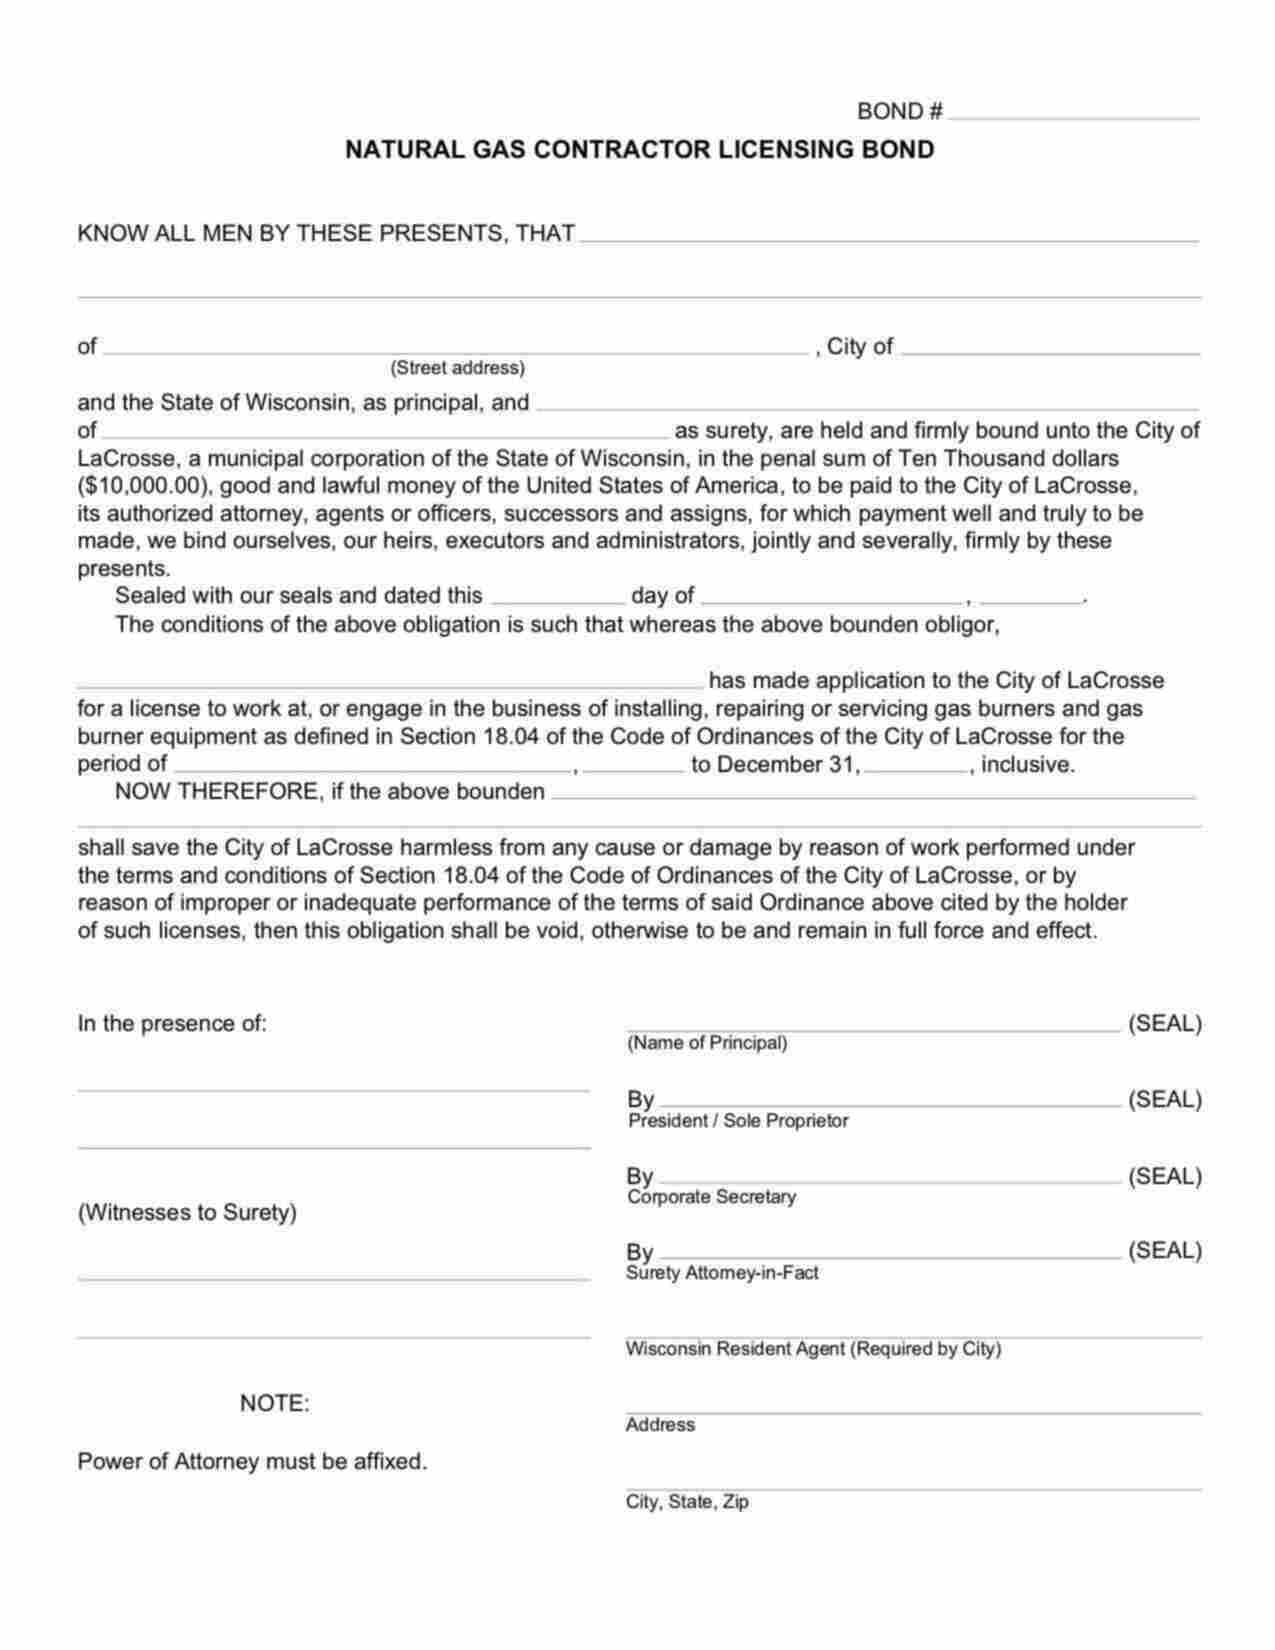 Wisconsin Natural Gas Contractor Bond Form